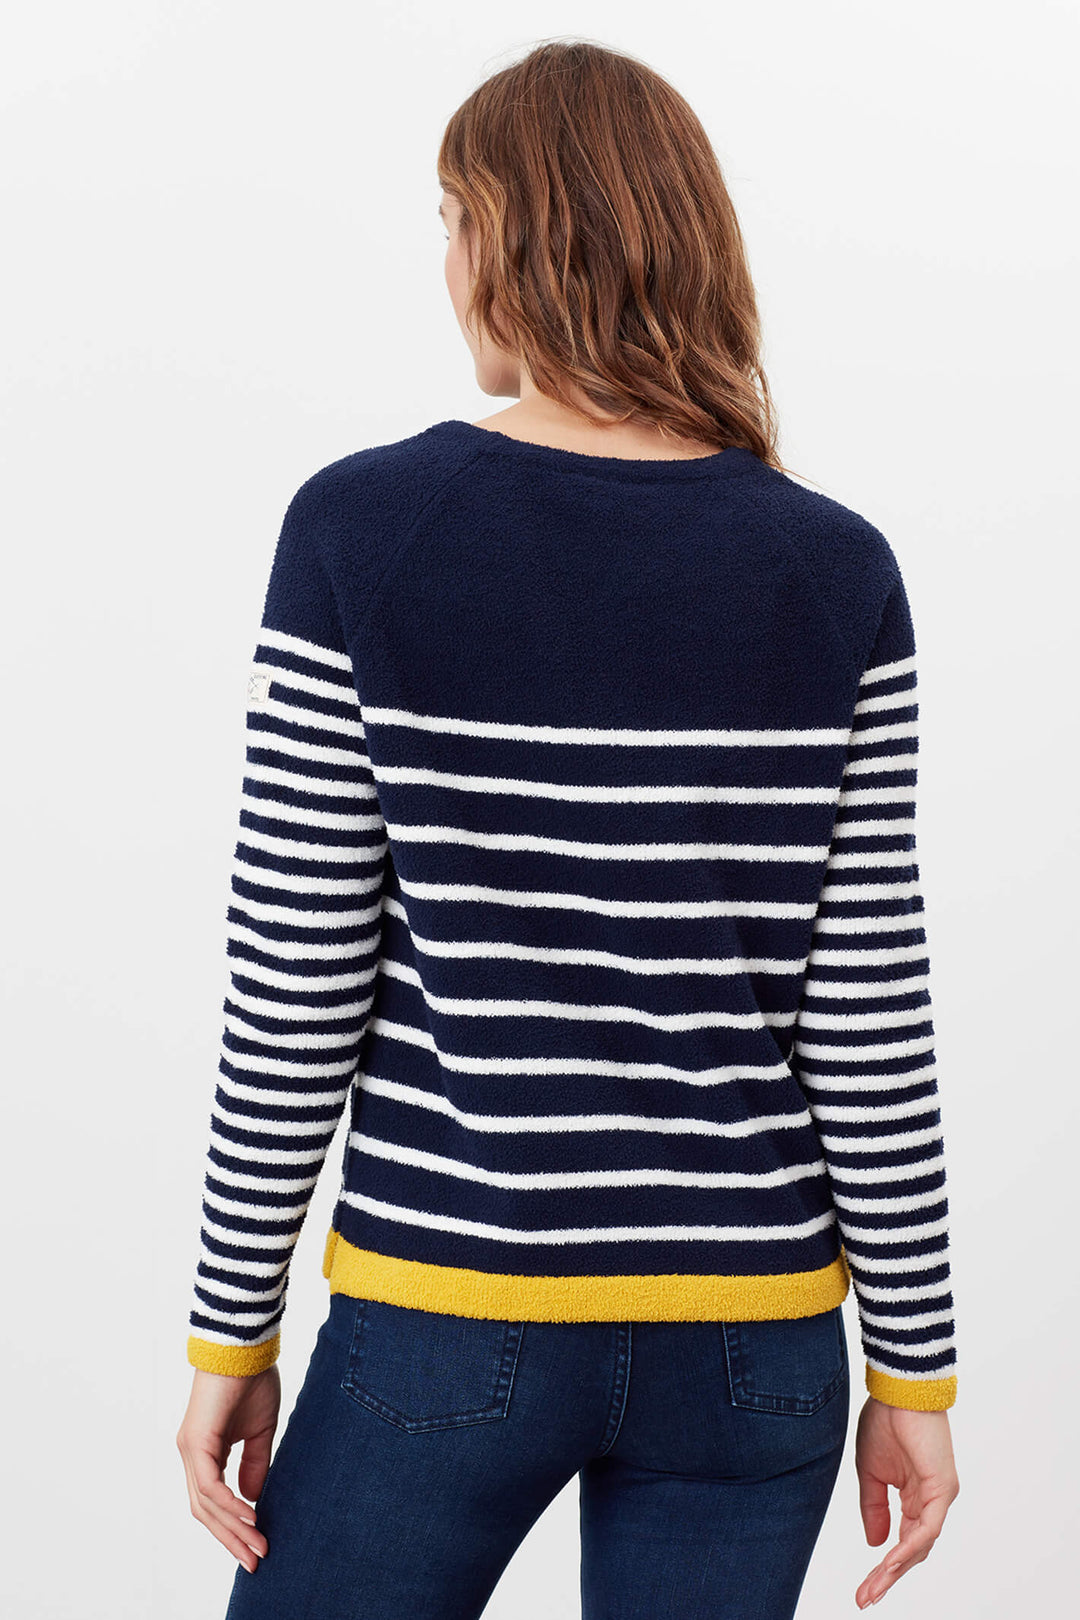 Joules 211575 Seaport Striped Jumper Navy - Shirley Allum#colour_navy